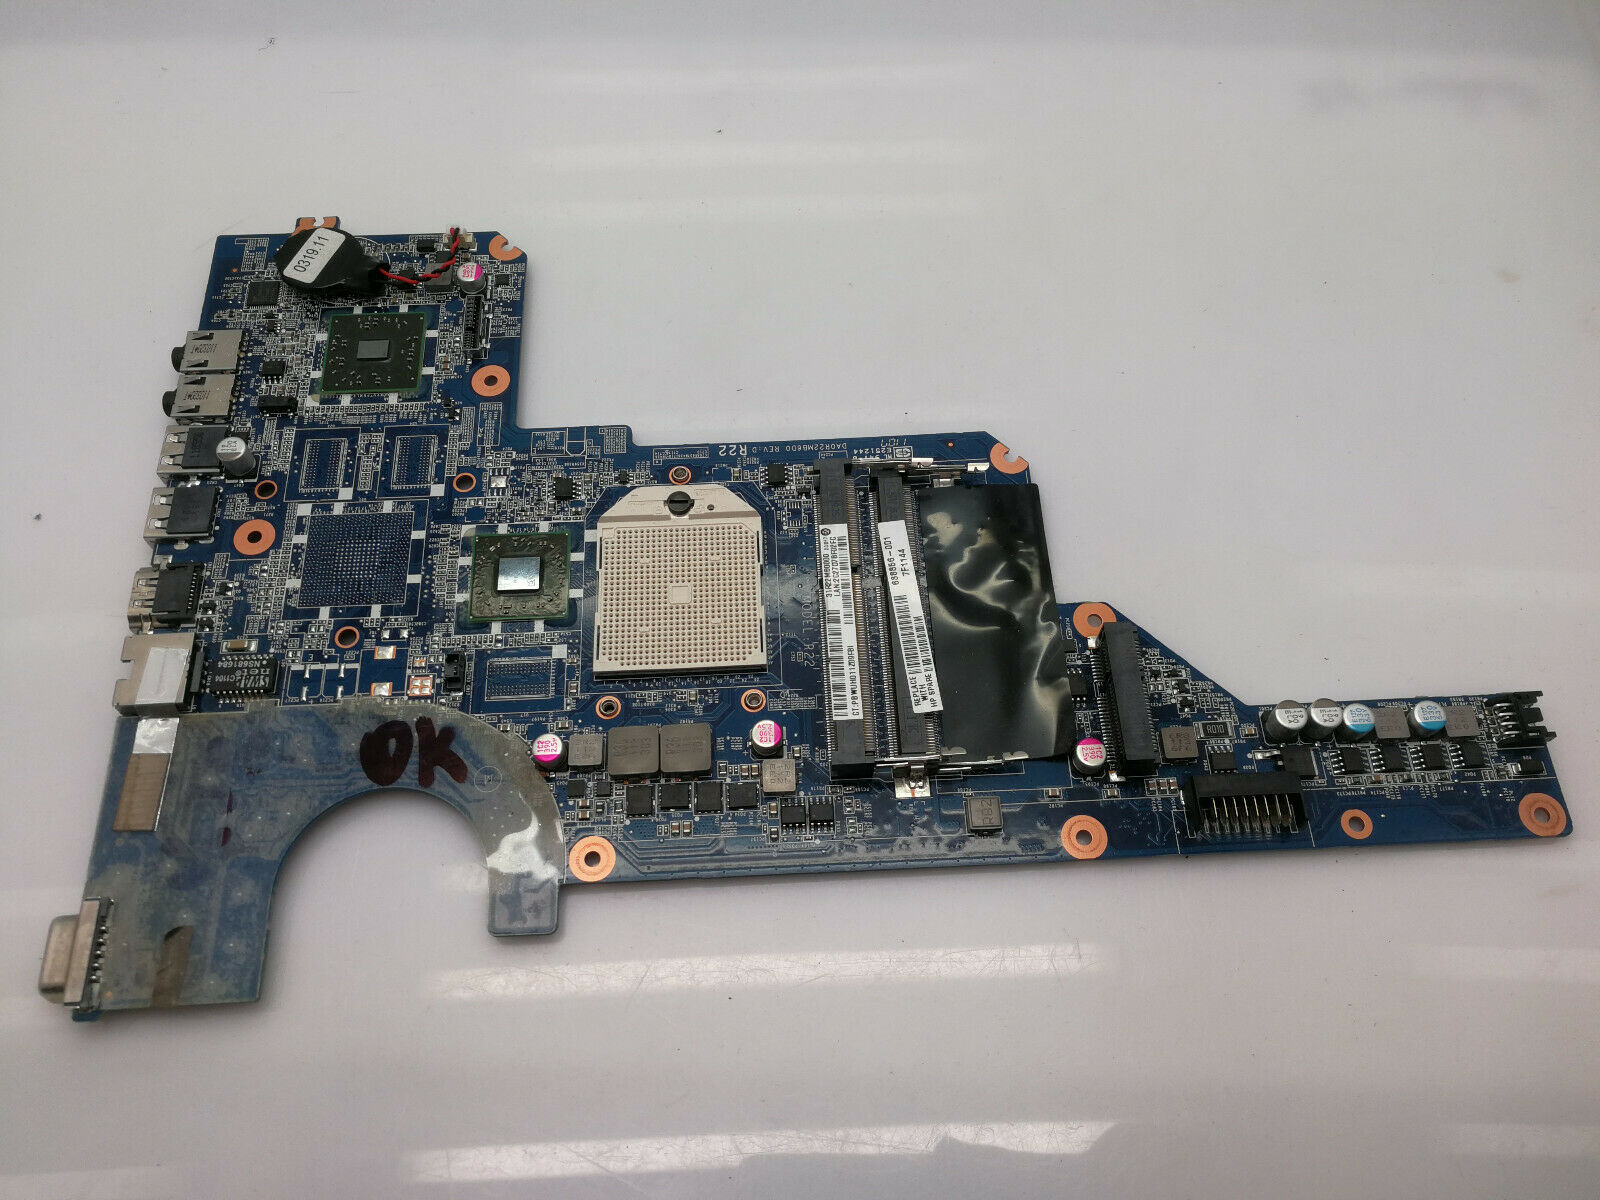 HP PAVILION G4 G6 G7 G7-1000 SERIES AMD LAPTOP MOTHERBOARD 638856-001 Compatible CPU Brand: AMD Brand: HP